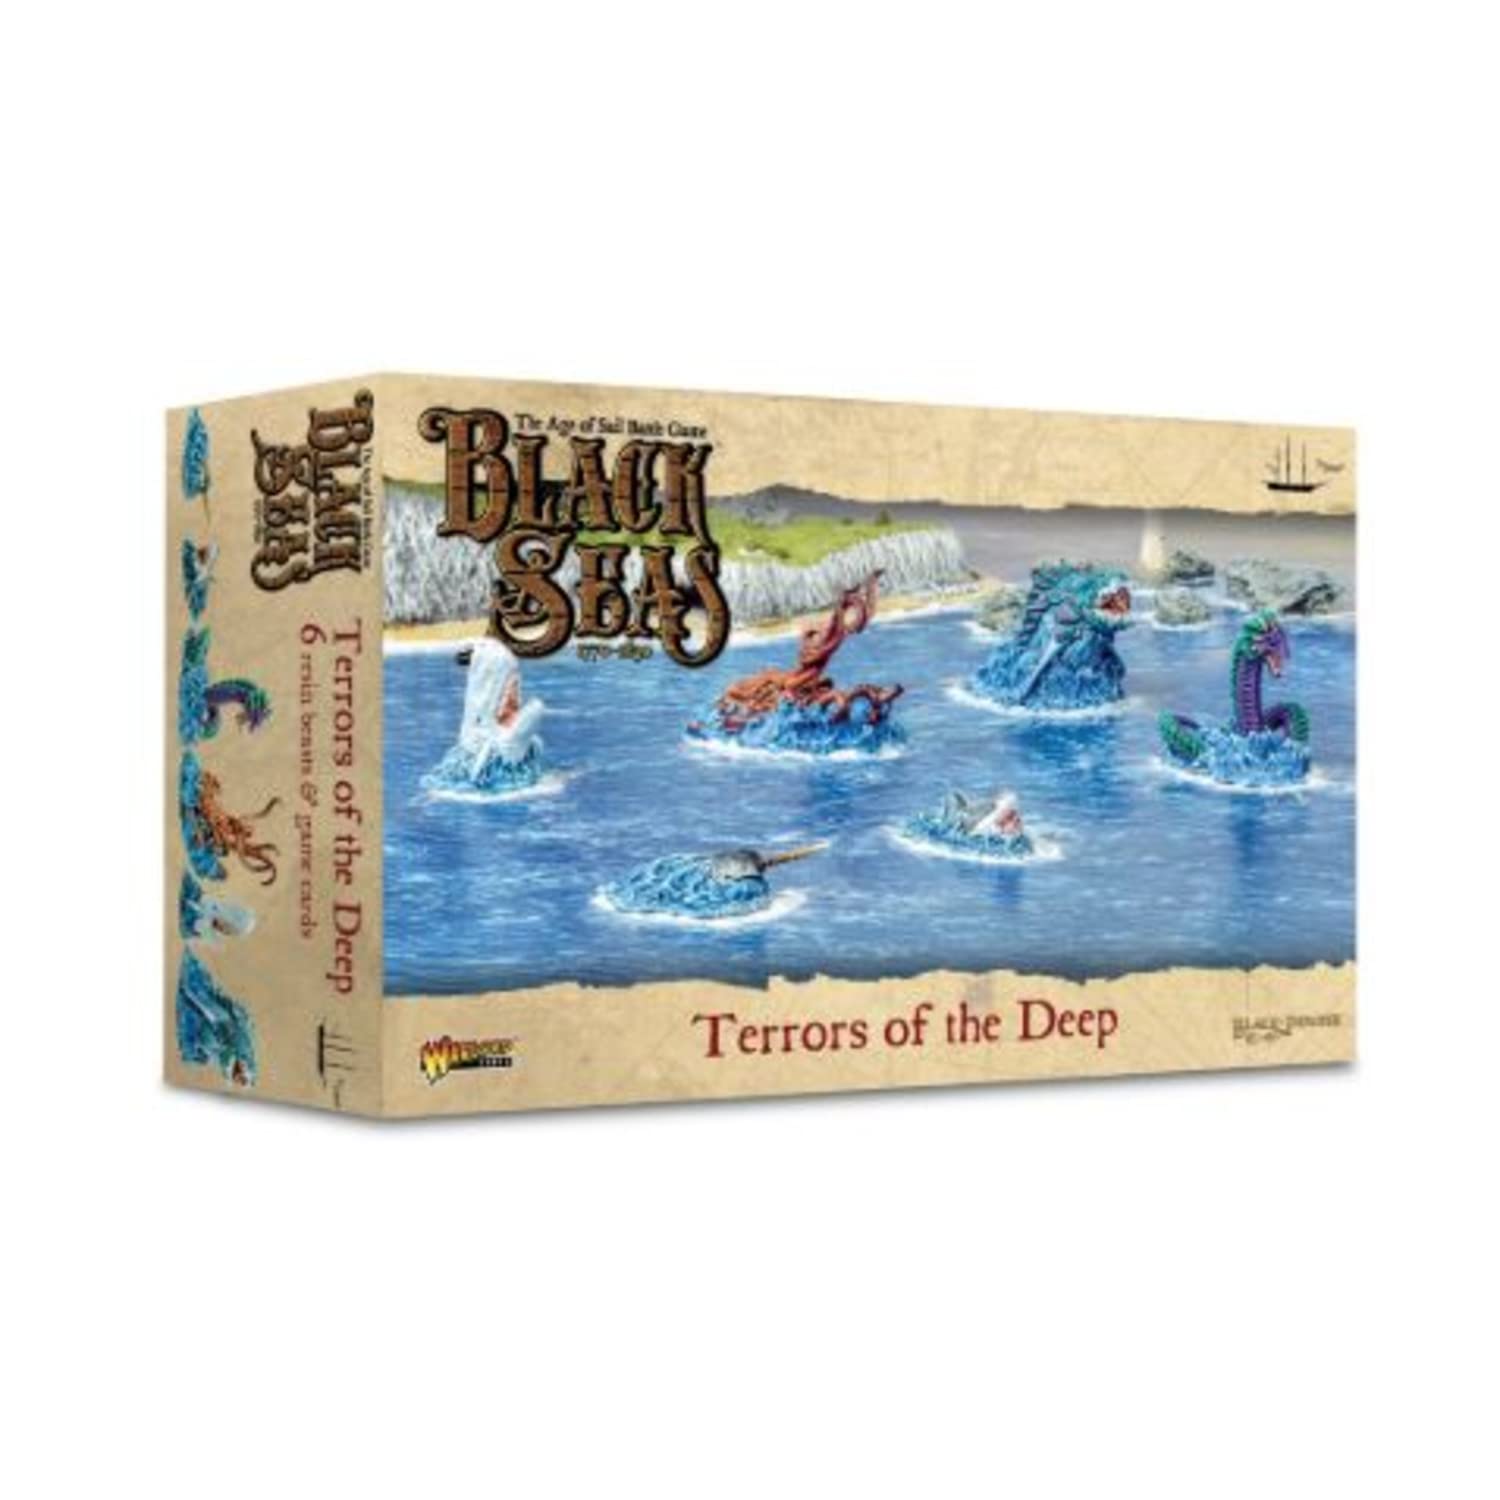 Warlord Games Miniatures Games Warlord Games Black Seas: Terrors of the Deep